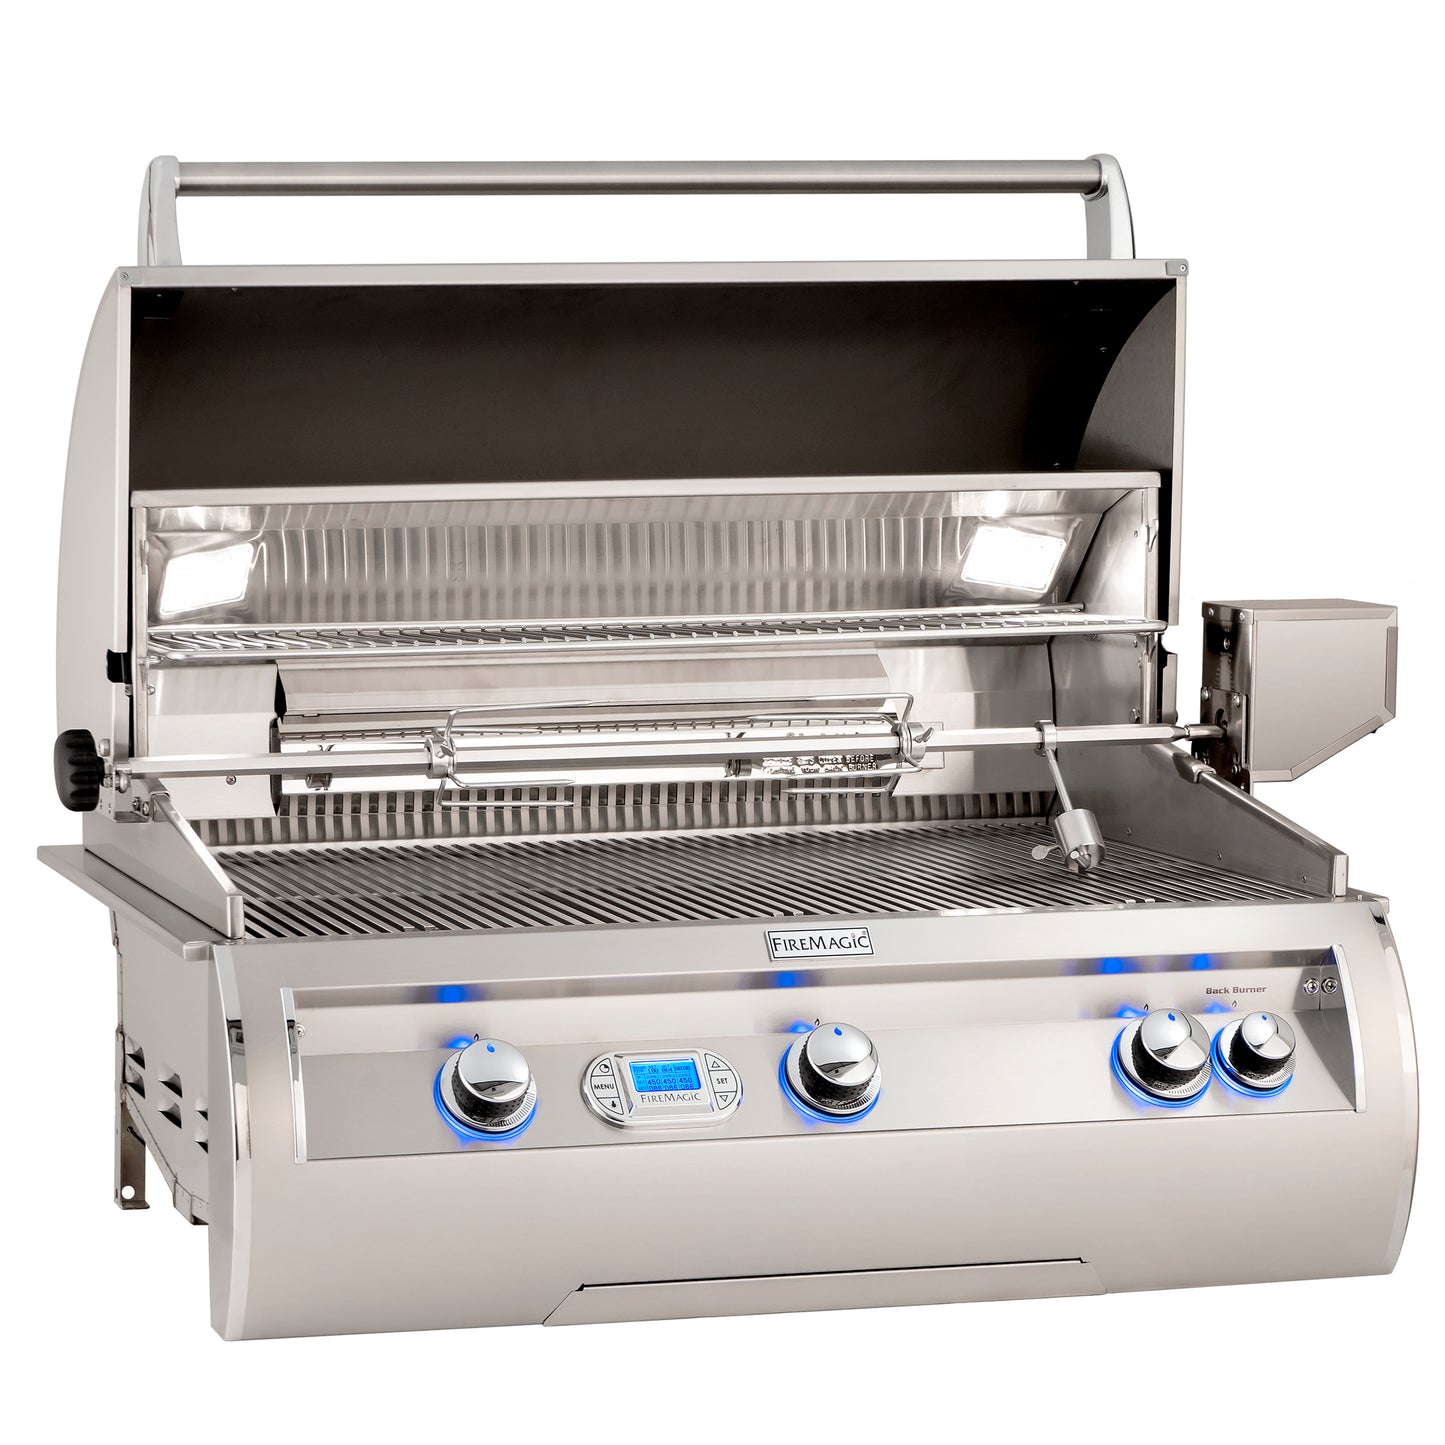 FireMagic Echelon E790i Built-In 36 in. Grill with Digital Thermometer